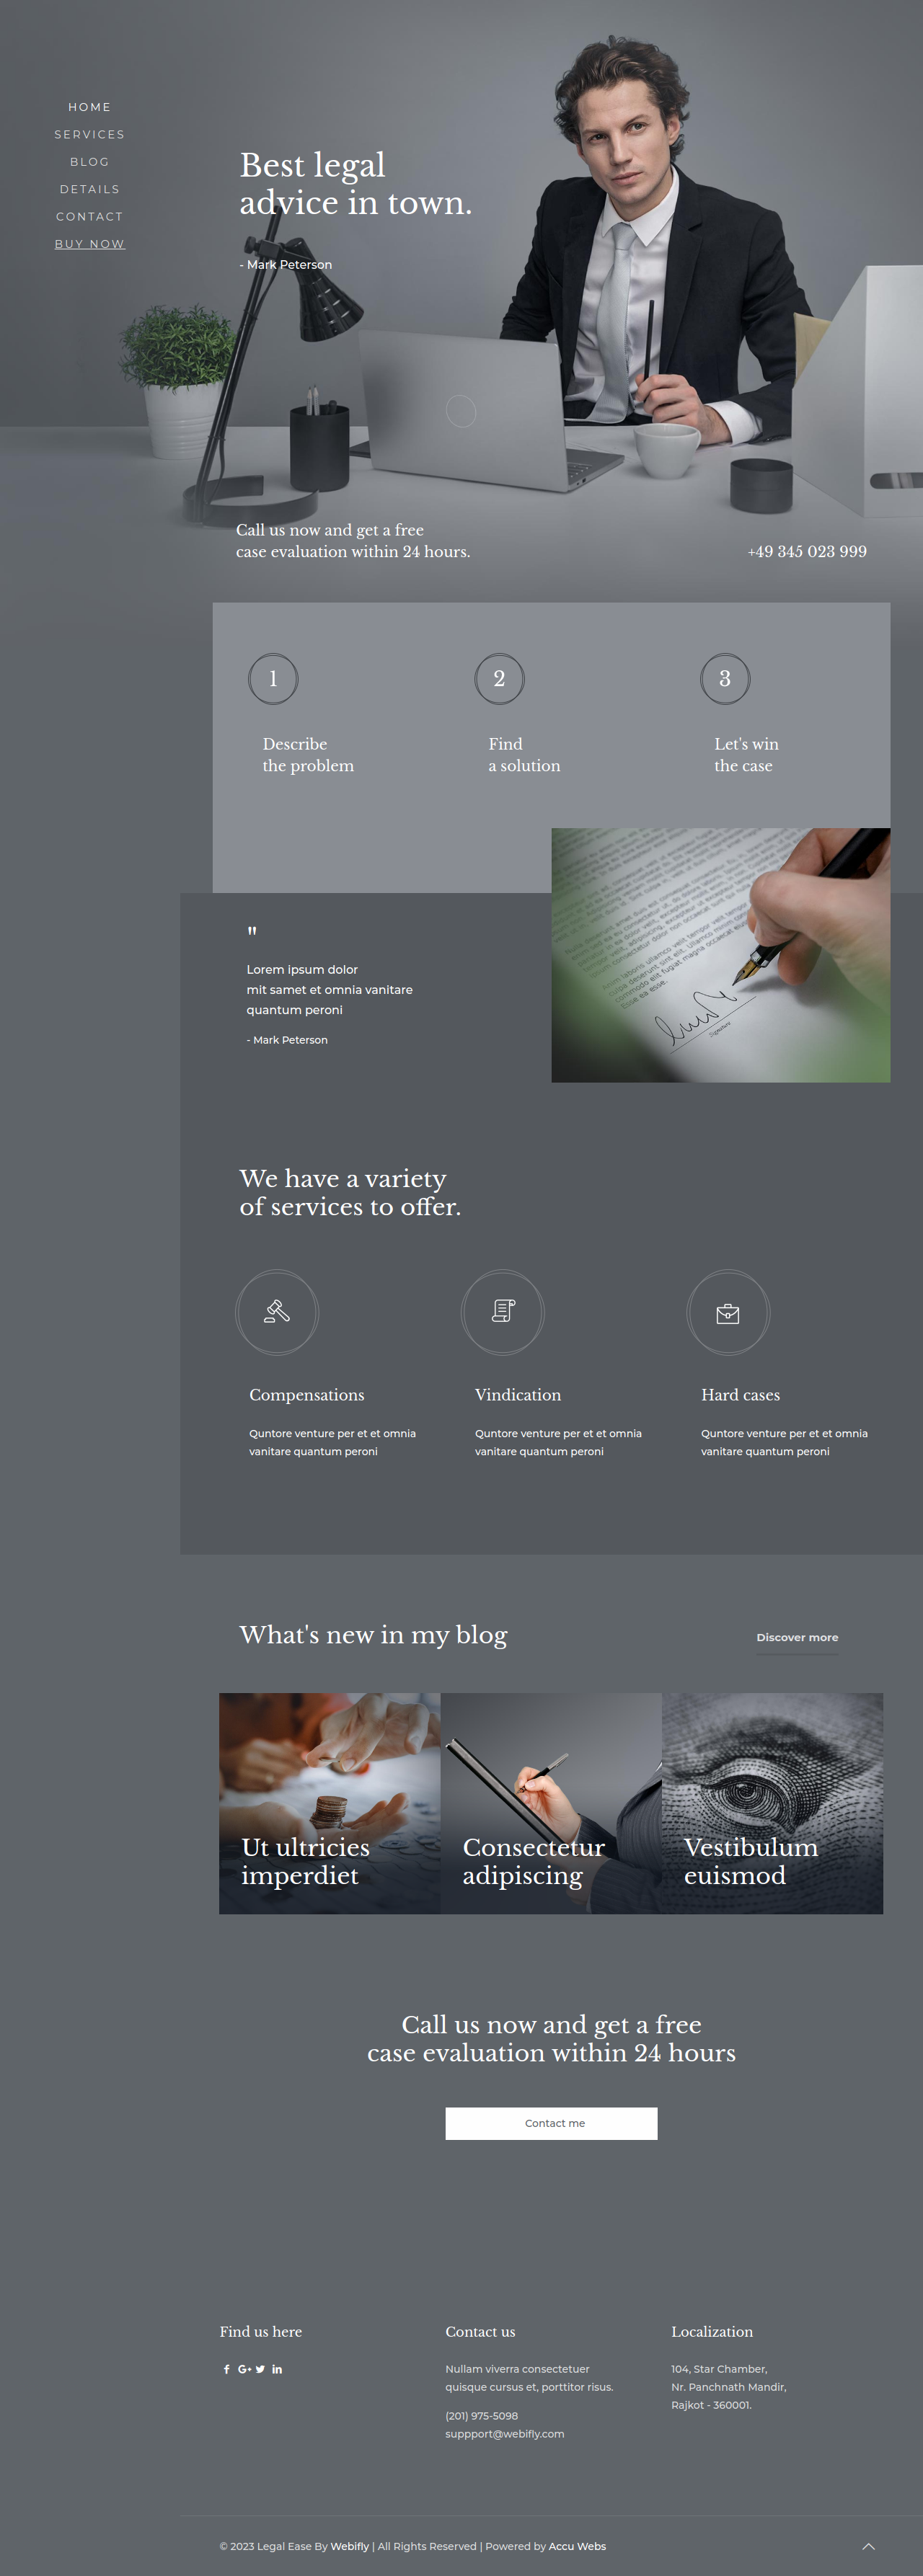 Legal Ease Law website templates